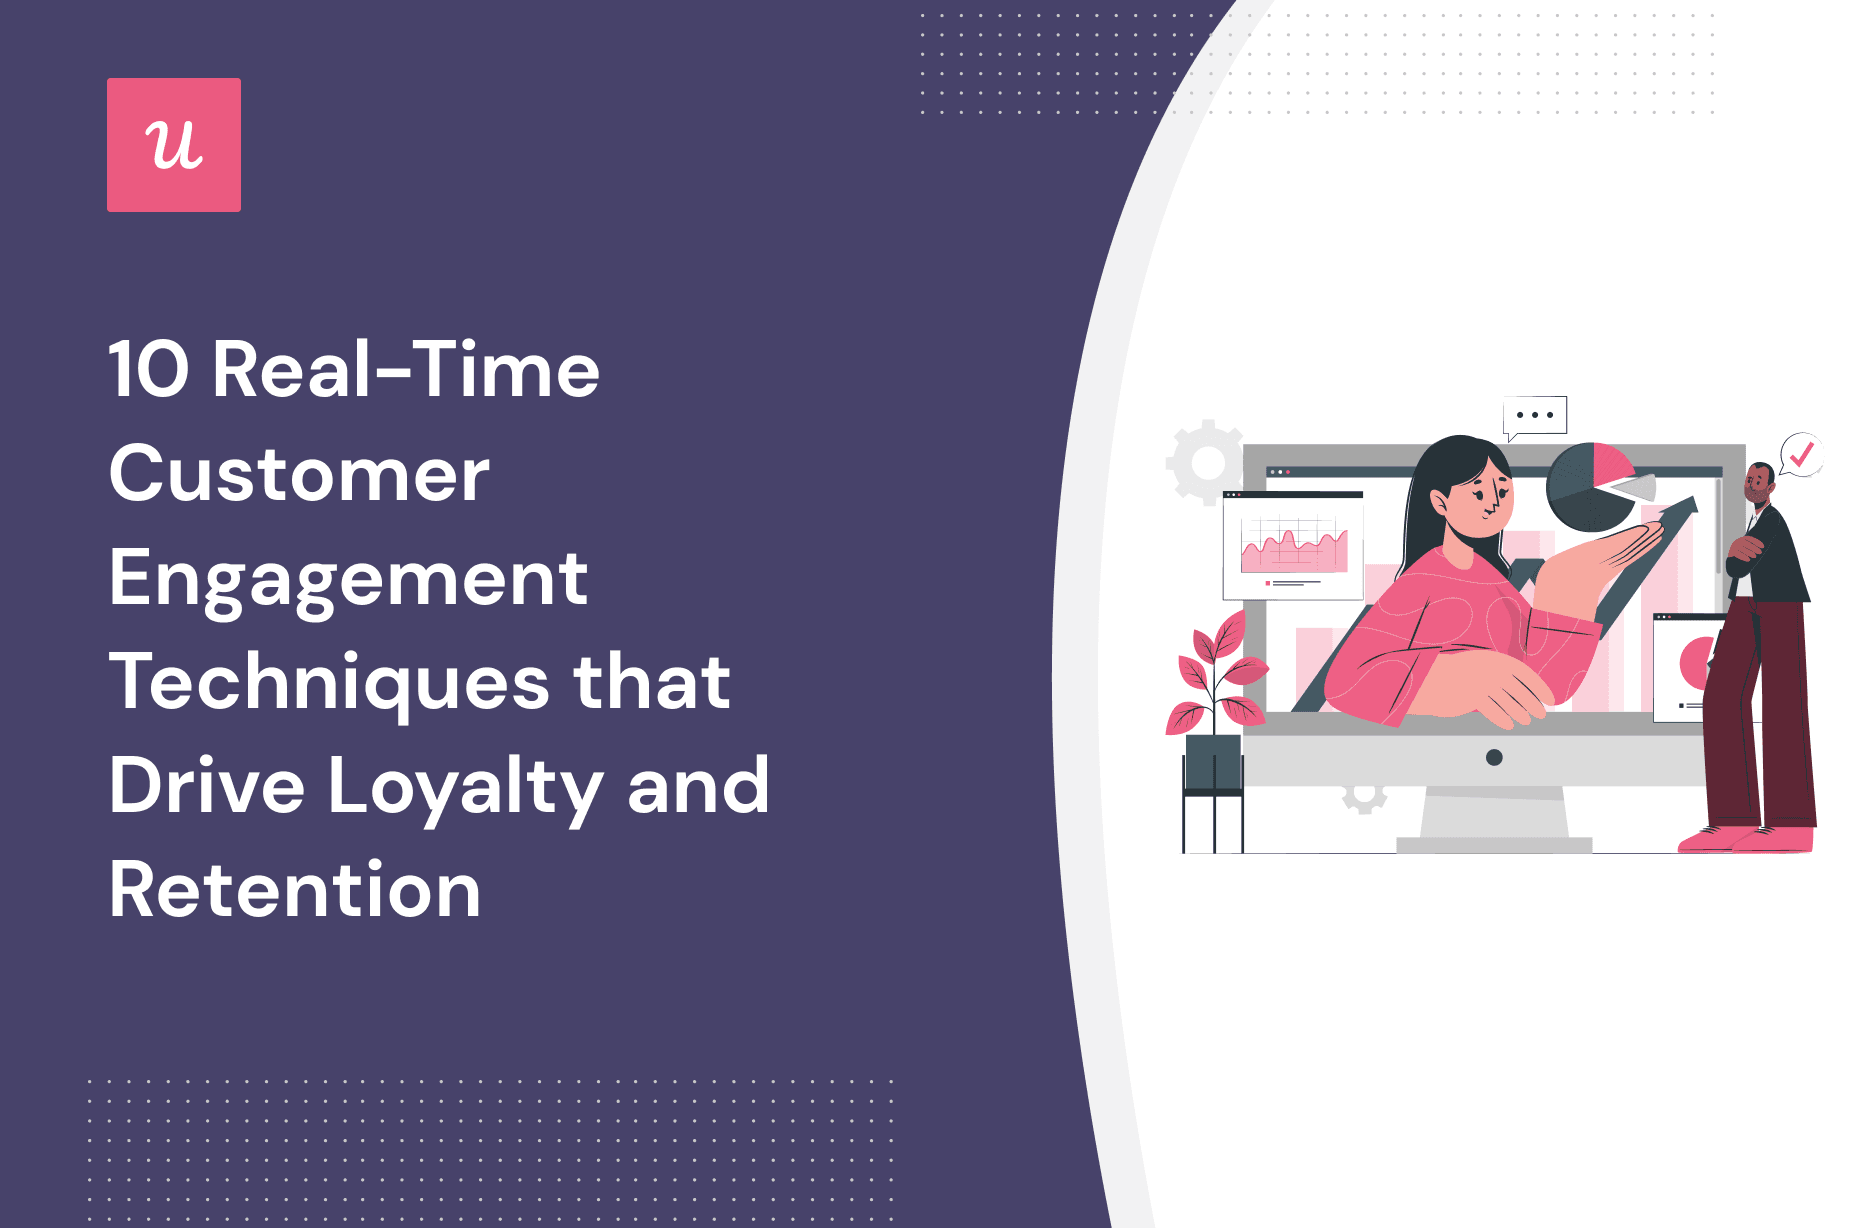 10 Real-Time Customer Engagement Techniques That Drive Loyalty and Retention cover